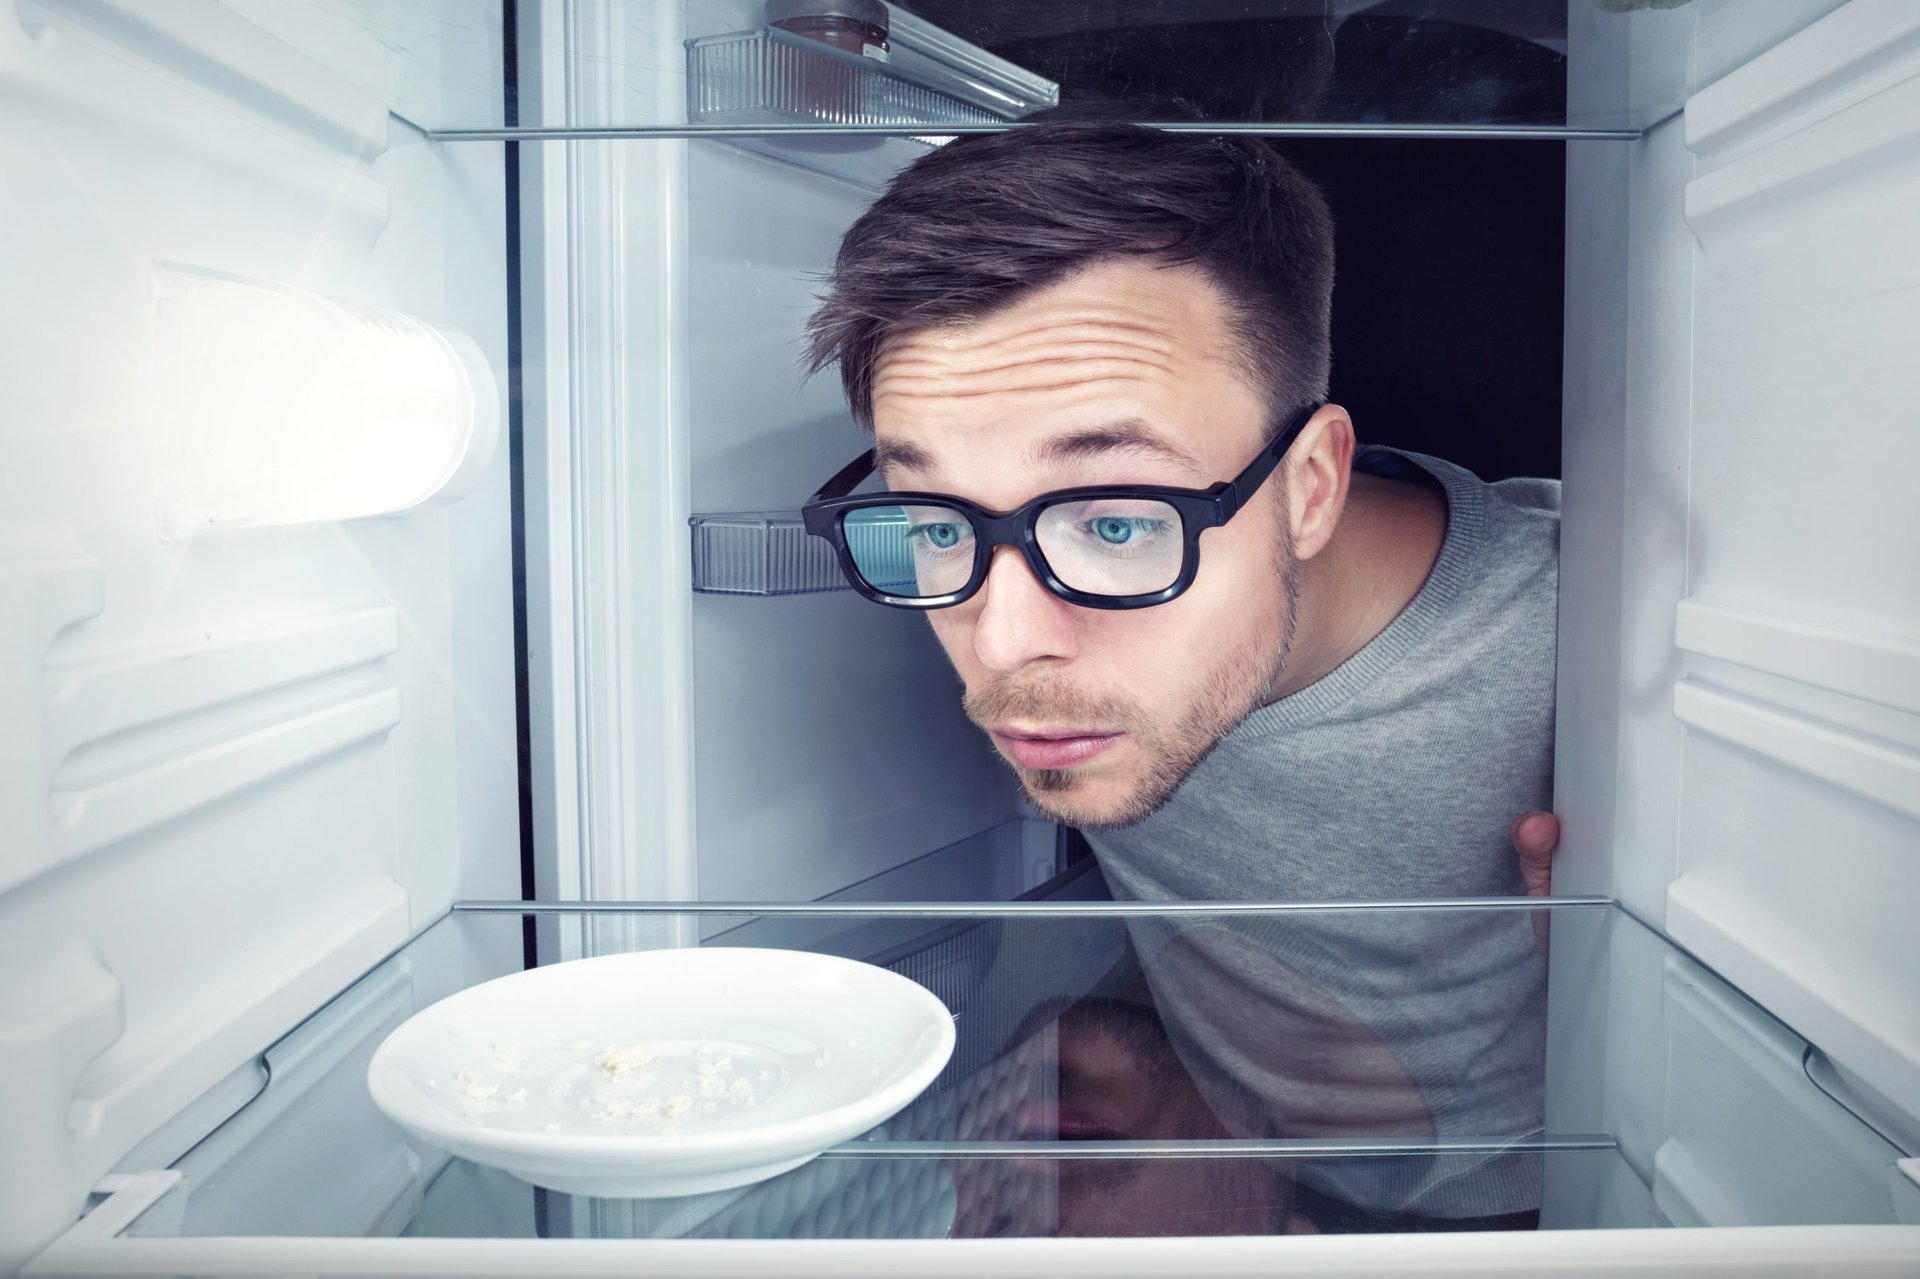 Man looking into an empty refrigerator